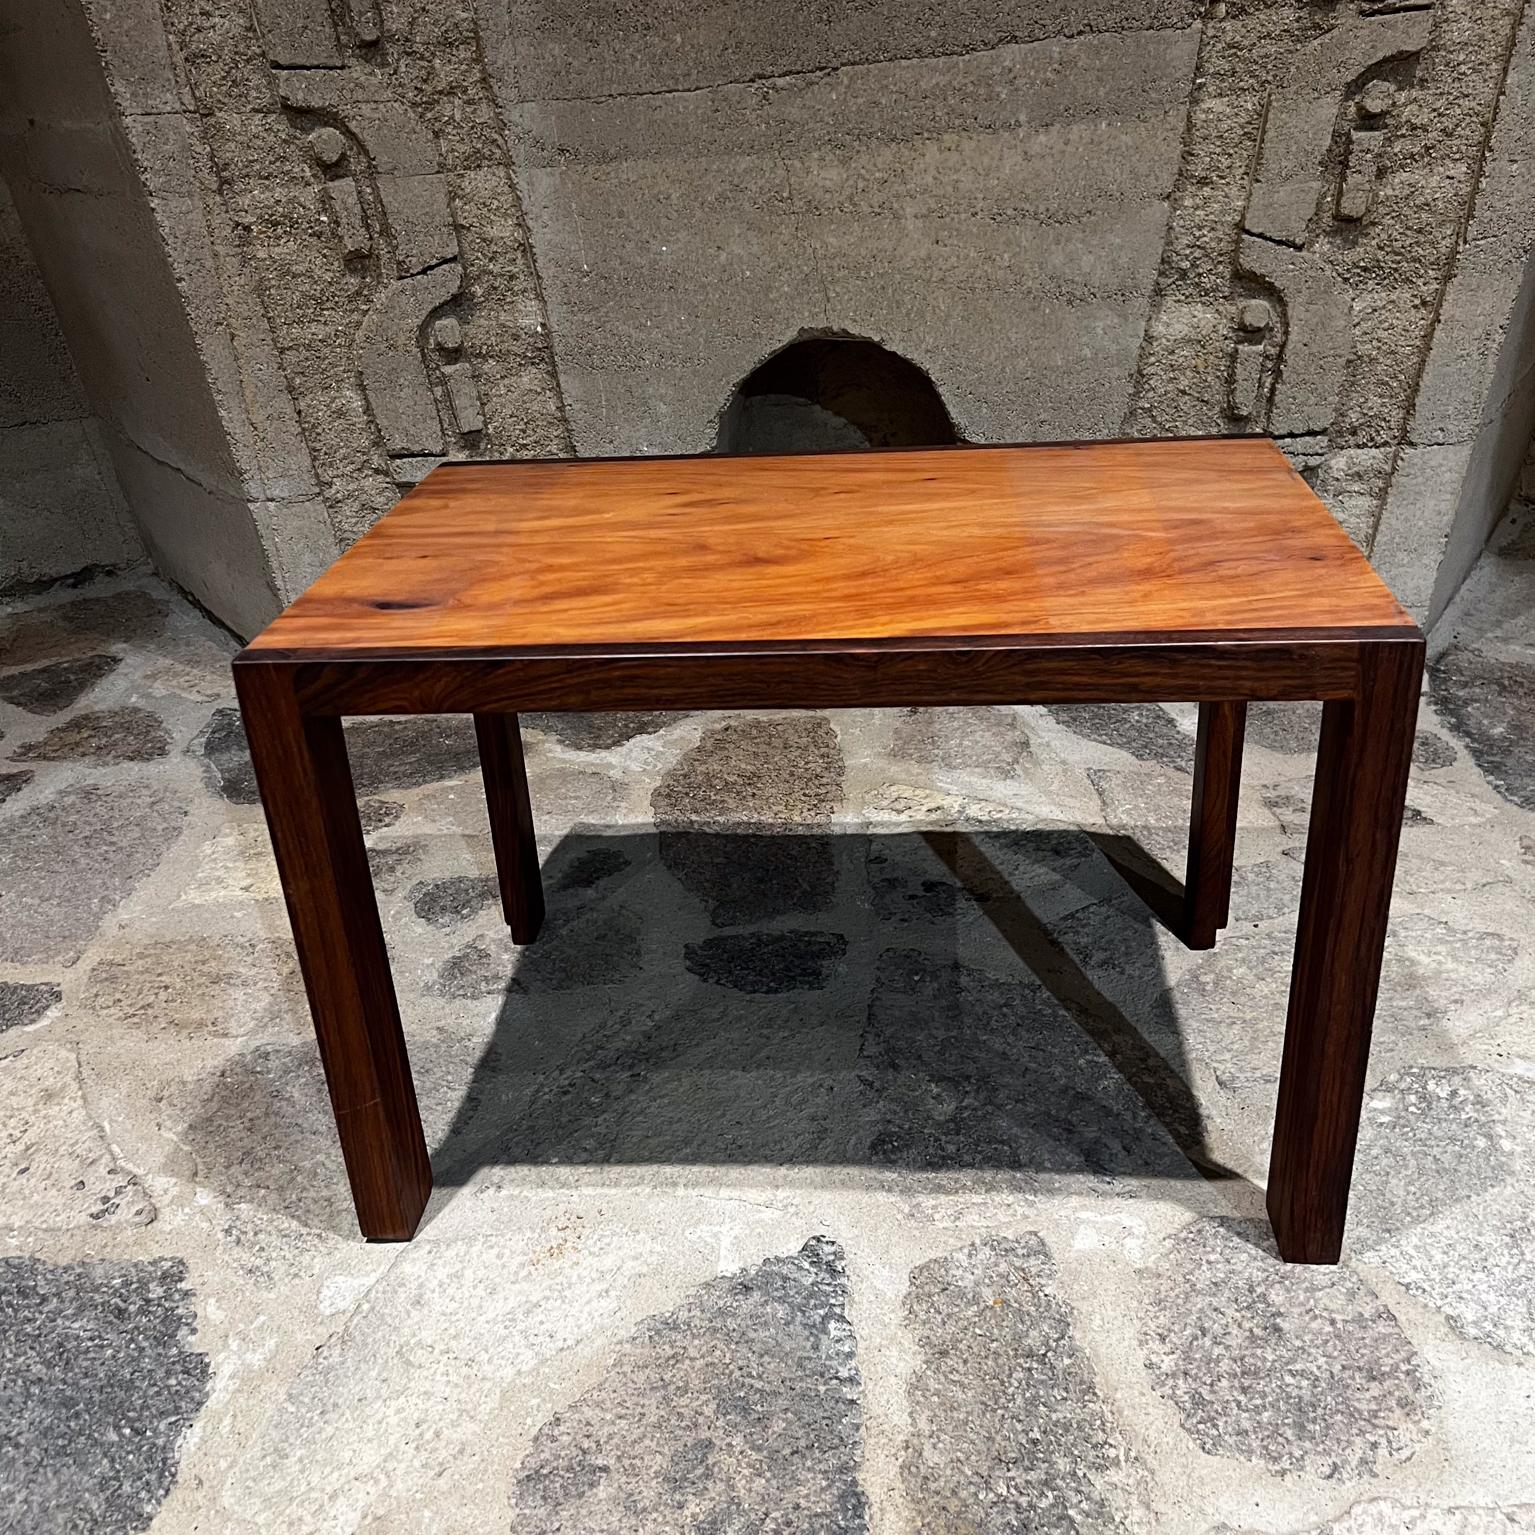 Studio Piece Clean Organic Modern Solid Wood Side Table.
Beautiful grain. 
George Nakashima style.
Side and legs solid rosewood. The top appears as mahogany.
No markings.
Great quality.
Firm and sturdy. Original preowned vintage condition.
16 in. H